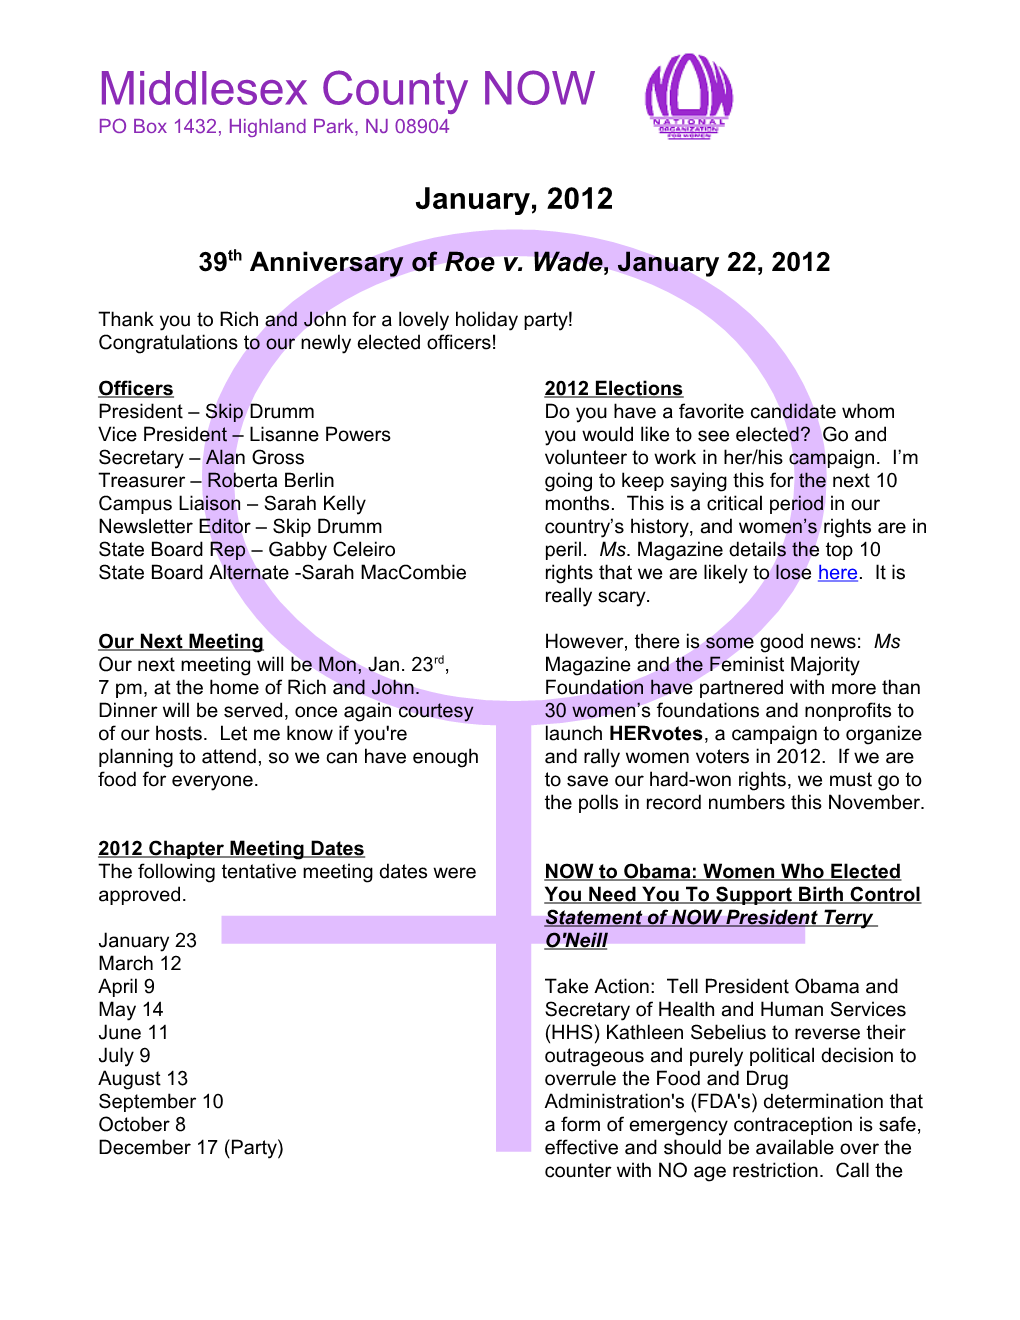 Middlesex County NOW Newsletter, January 2012